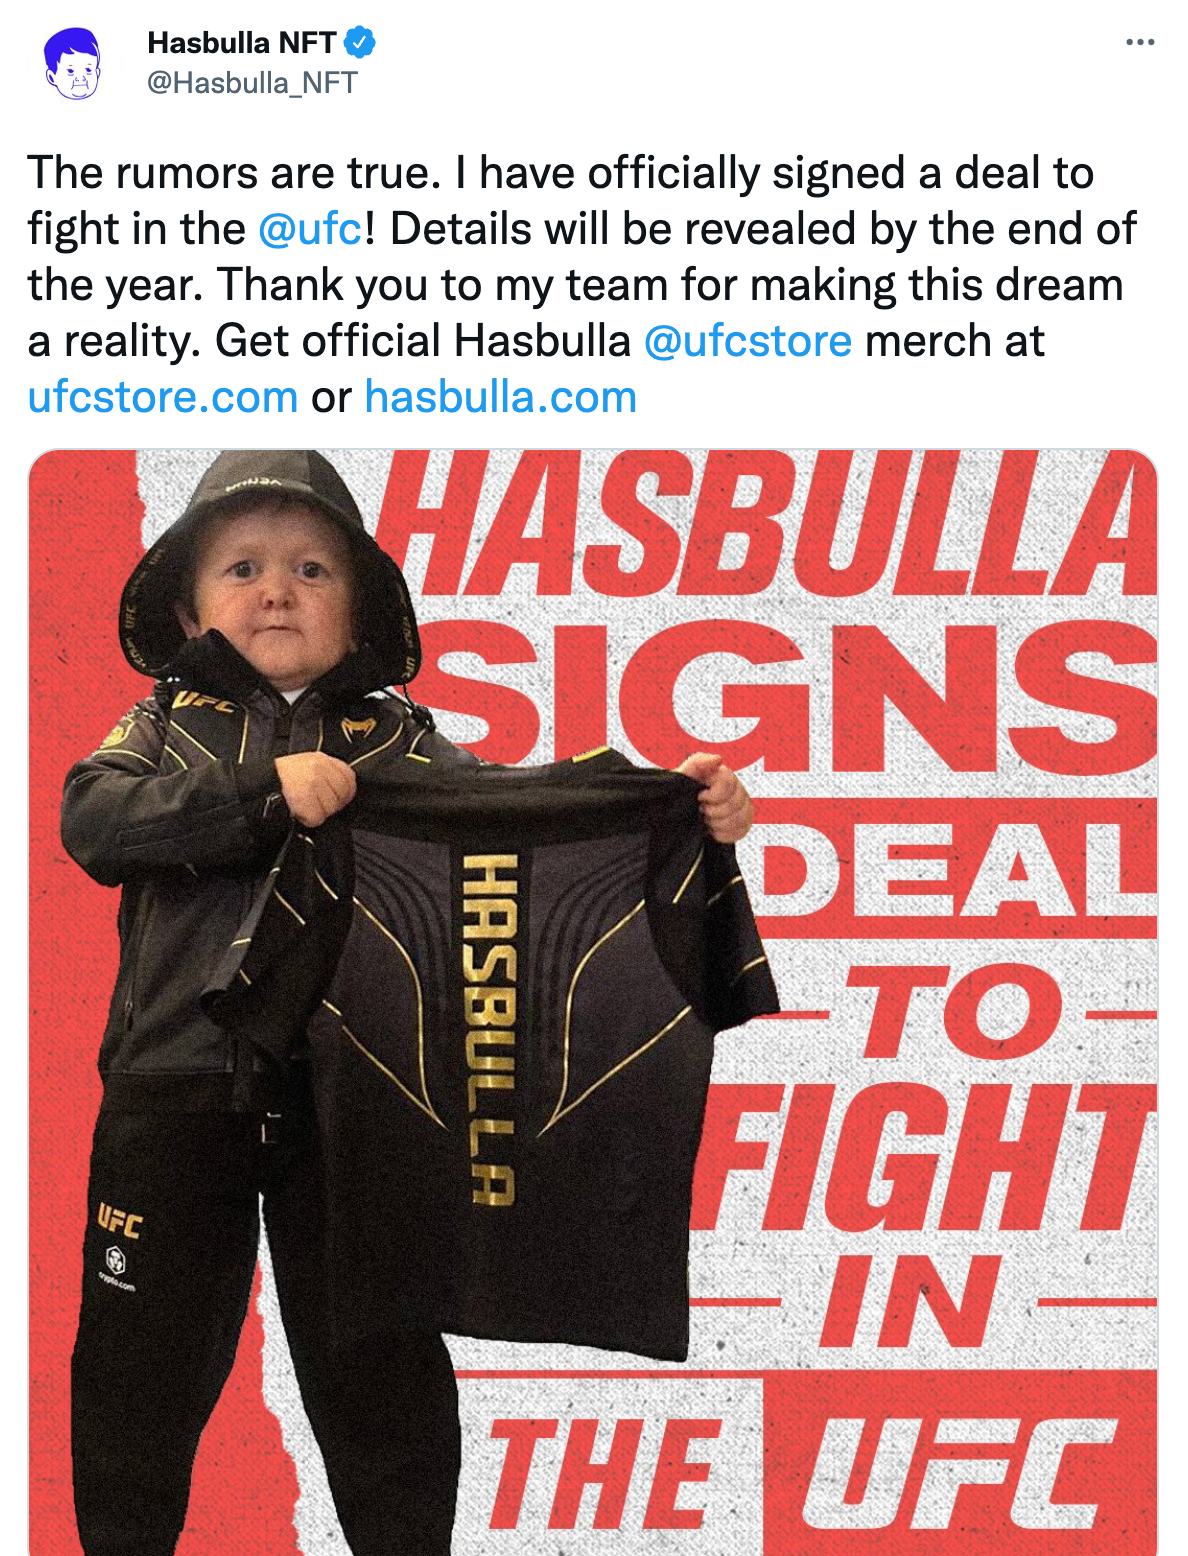 Hasbulla Magomedov signs UFC contract and confirms fight